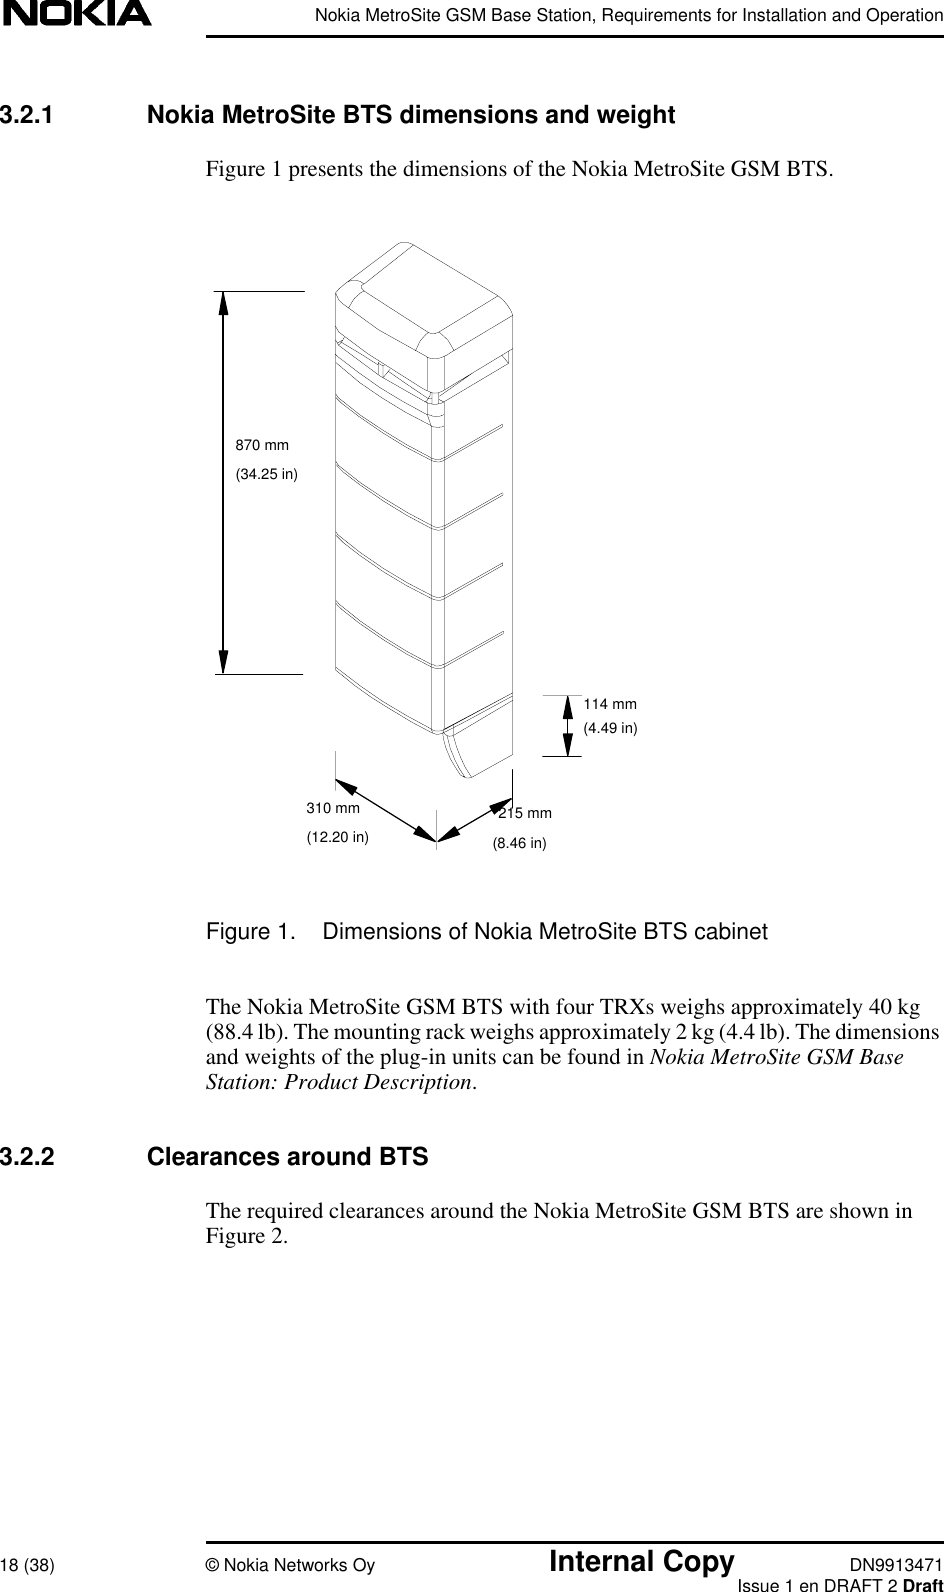 Nokia MetroSite GSM Base Station, Requirements for Installation and Operation18 (38) © Nokia Networks Oy Internal Copy DN9913471Issue 1 en DRAFT 2 Draft3.2.1 Nokia MetroSite BTS dimensions and weightFigure 1 presents the dimensions of the Nokia MetroSite GSM BTS.Figure 1. Dimensions of Nokia MetroSite BTS cabinetThe Nokia MetroSite GSM BTS with four TRXs weighs approximately 40 kg(88.4 lb). The mounting rack weighs approximately 2 kg (4.4 lb). The dimensionsand weights of the plug-in units can be found in Nokia MetroSite GSM BaseStation: Product Description.3.2.2 Clearances around BTSThe required clearances around the Nokia MetroSite GSM BTS are shown inFigure 2.310 mm 215 mm114 mm870 mm(34.25 in)(4.49 in)(12.20 in) (8.46 in)